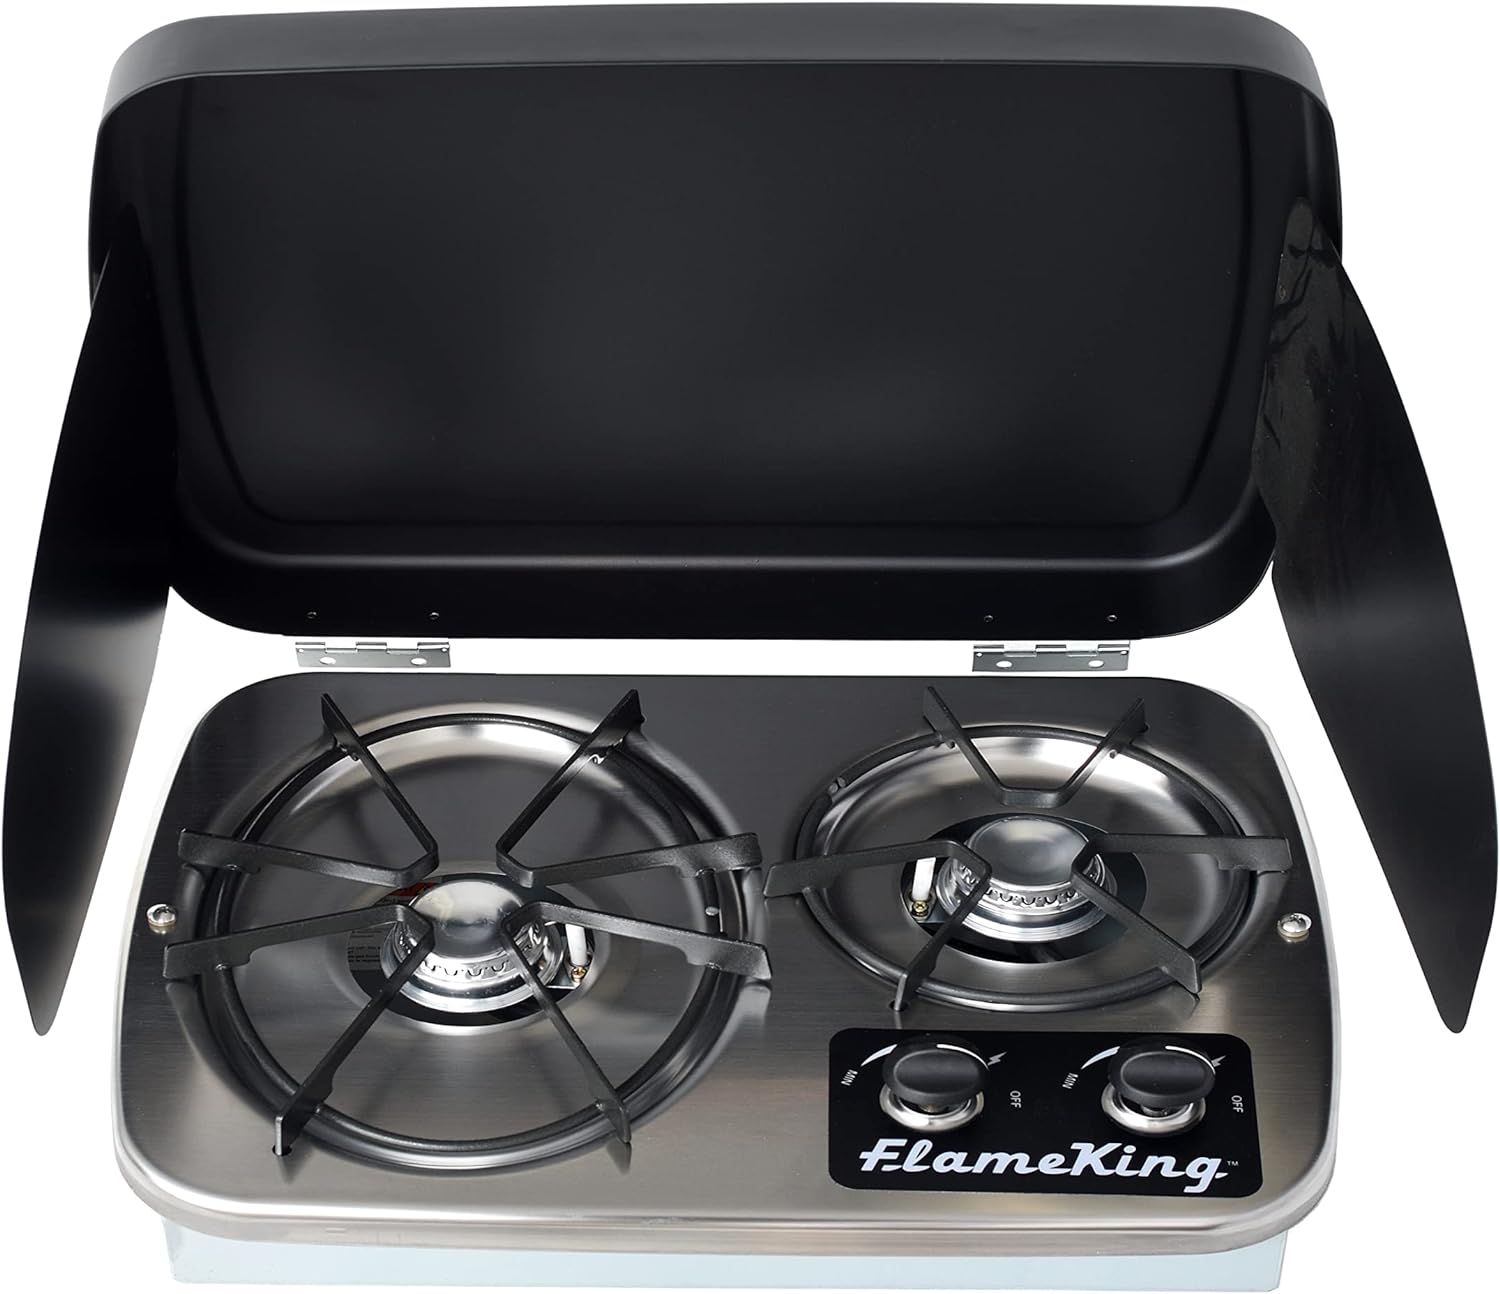 A Flame King 2 Burner Built-In RV Trailer Stove with Wind Shield with two burners and a lid.